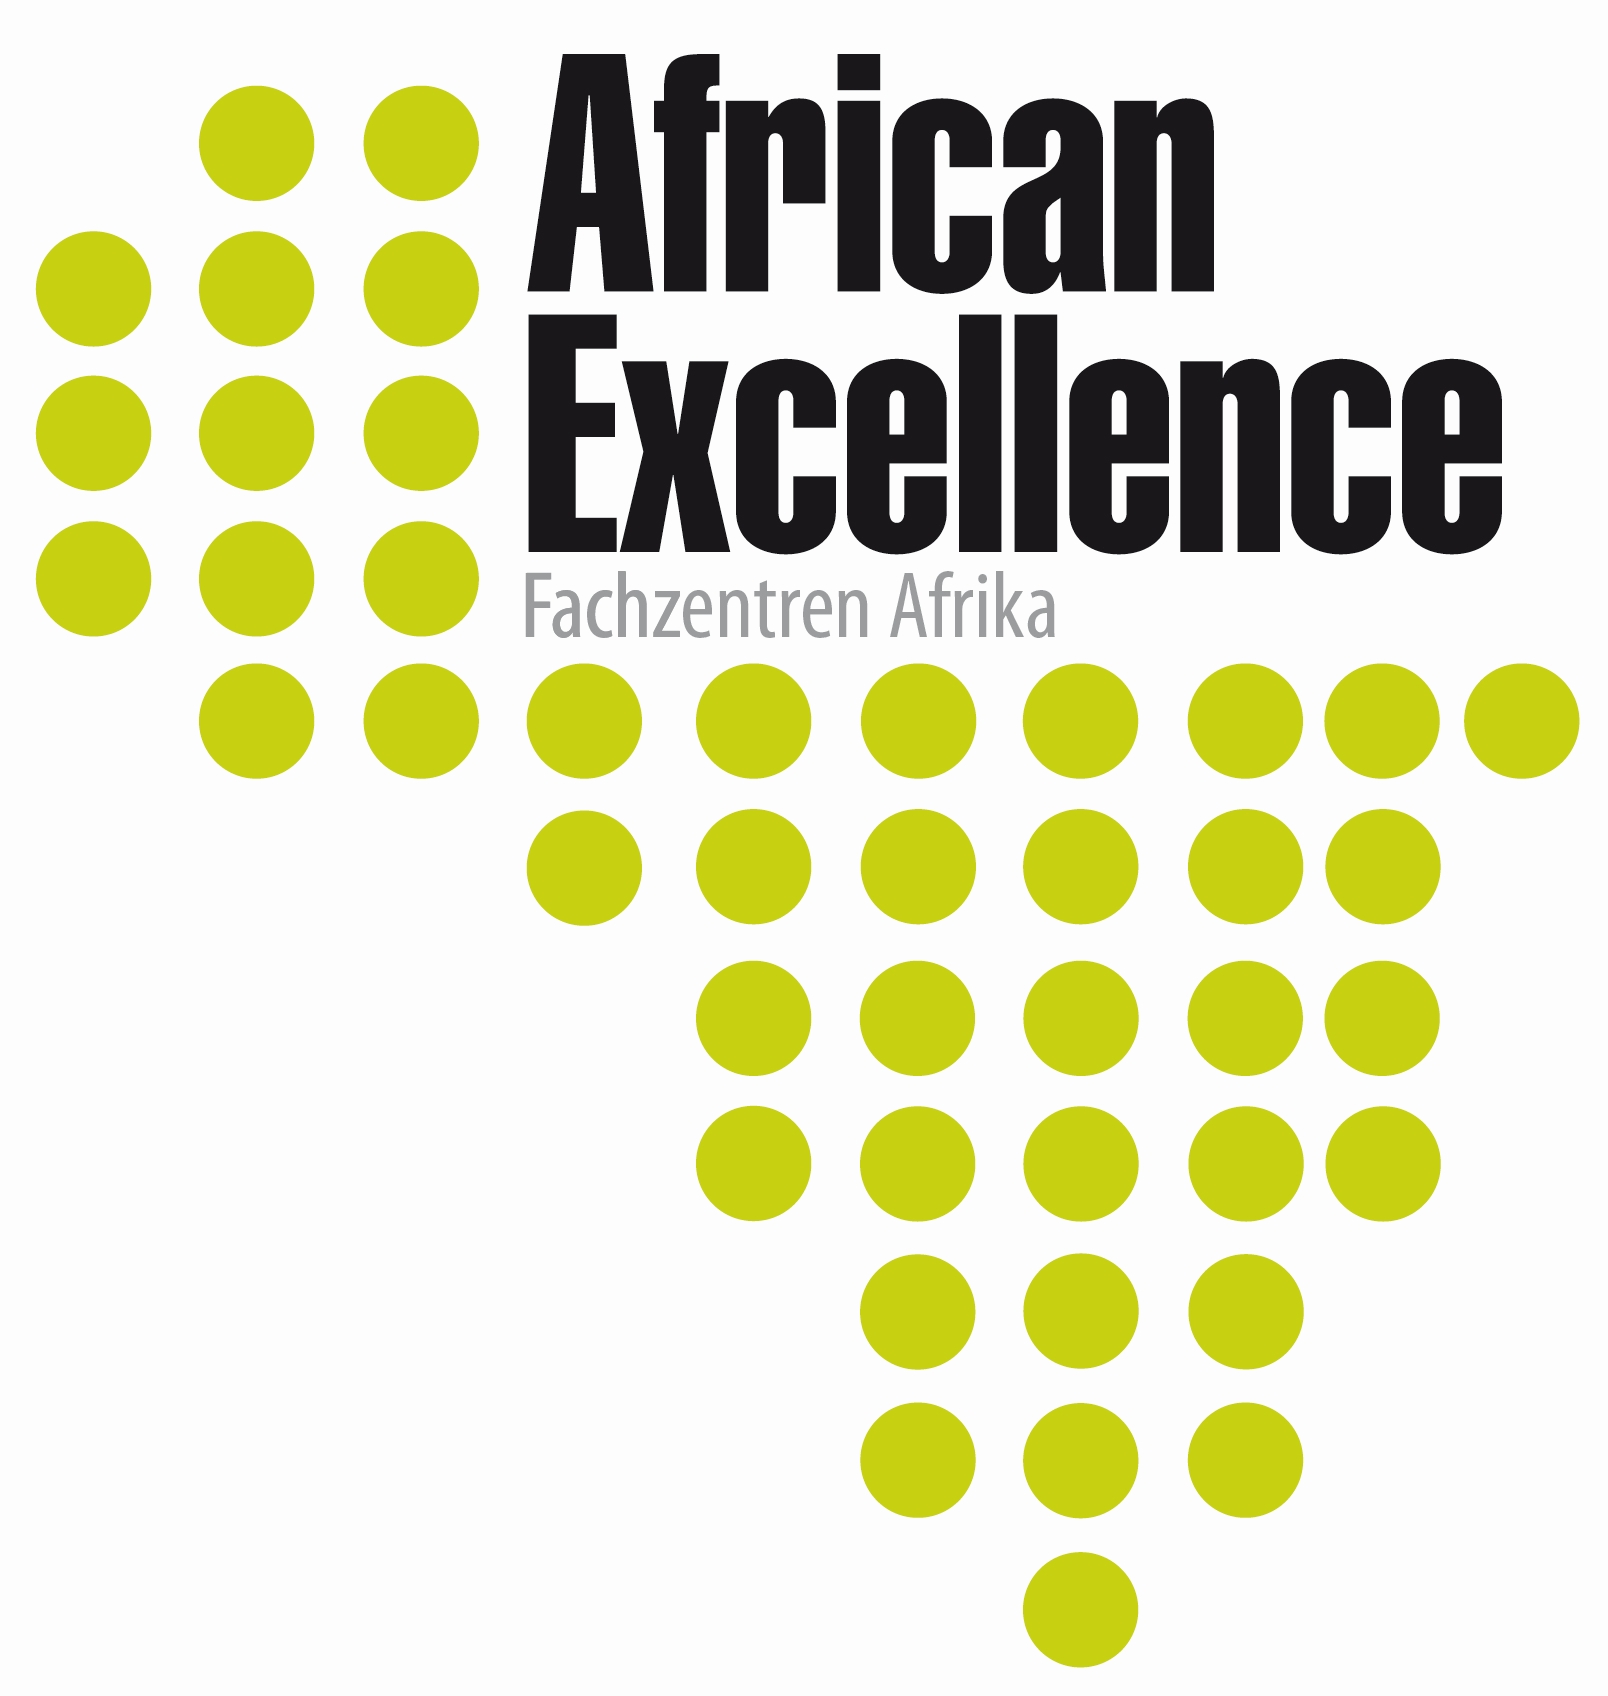 [Translate to English:] African Excellence Logo